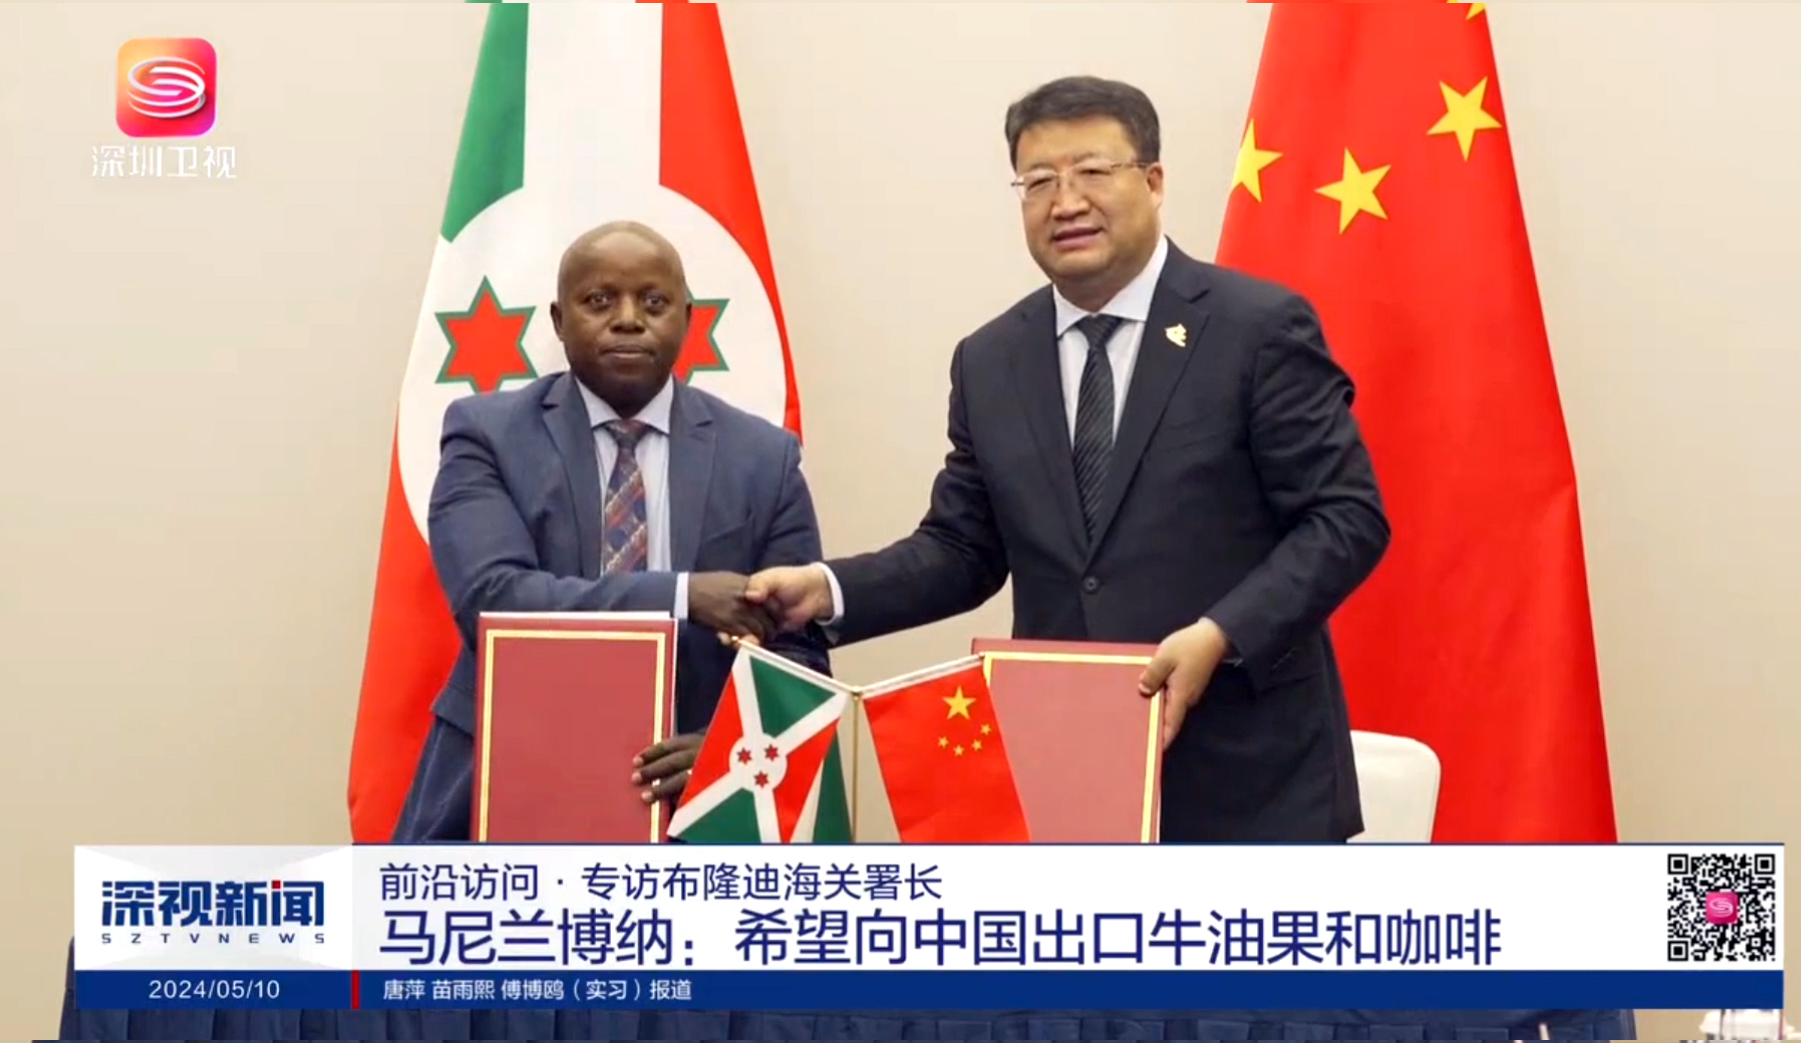 the General Administration of Customs of China and the National Revenue Office of the Republic of Burundi